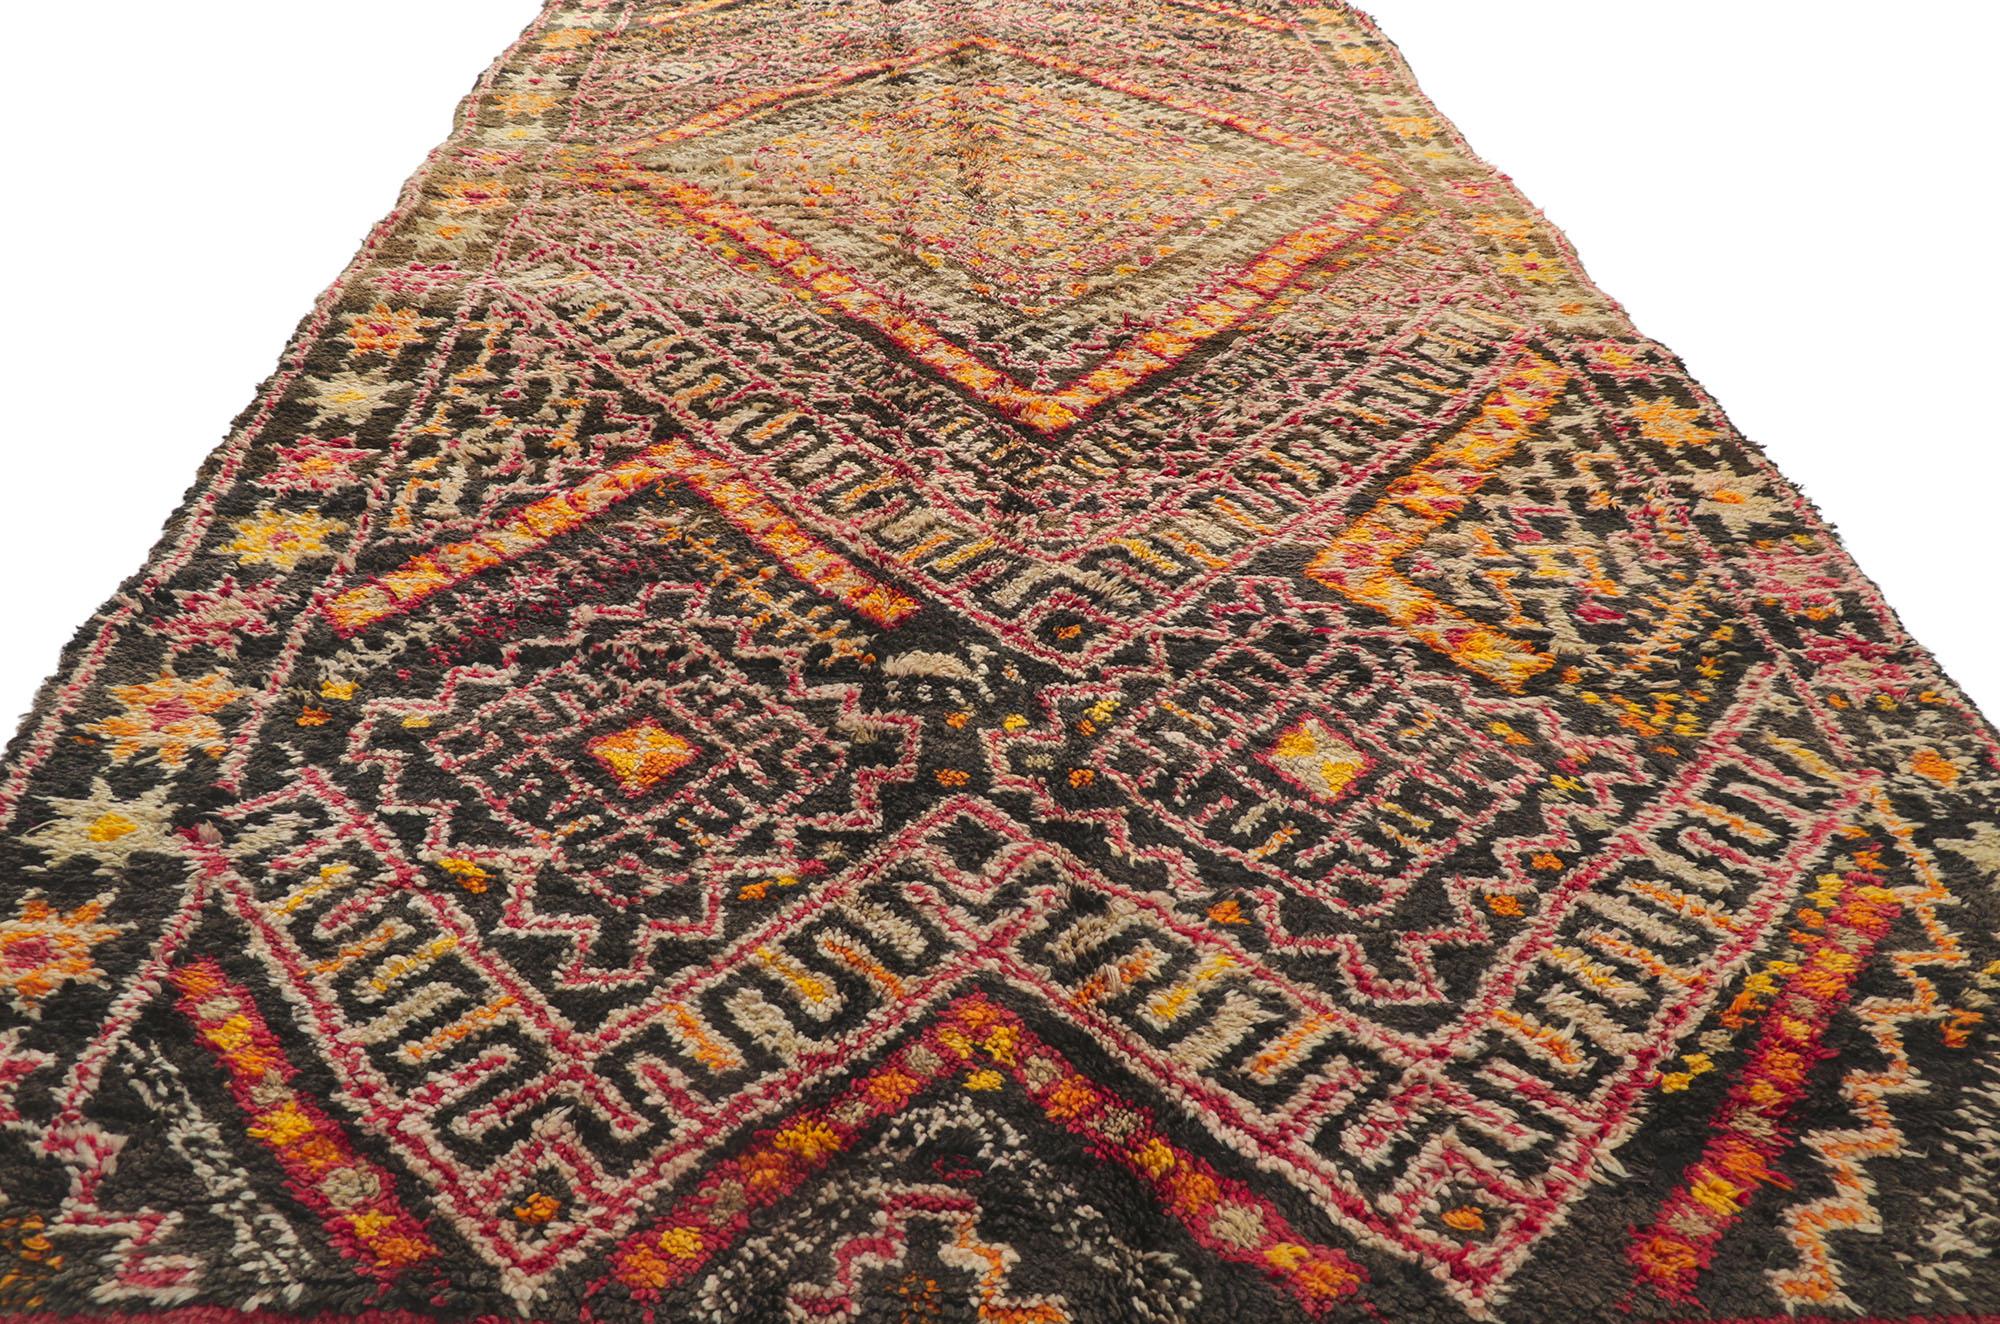 Vintage Berber Moroccan Beni M'Guild Rug with Tribal Style In Good Condition For Sale In Dallas, TX